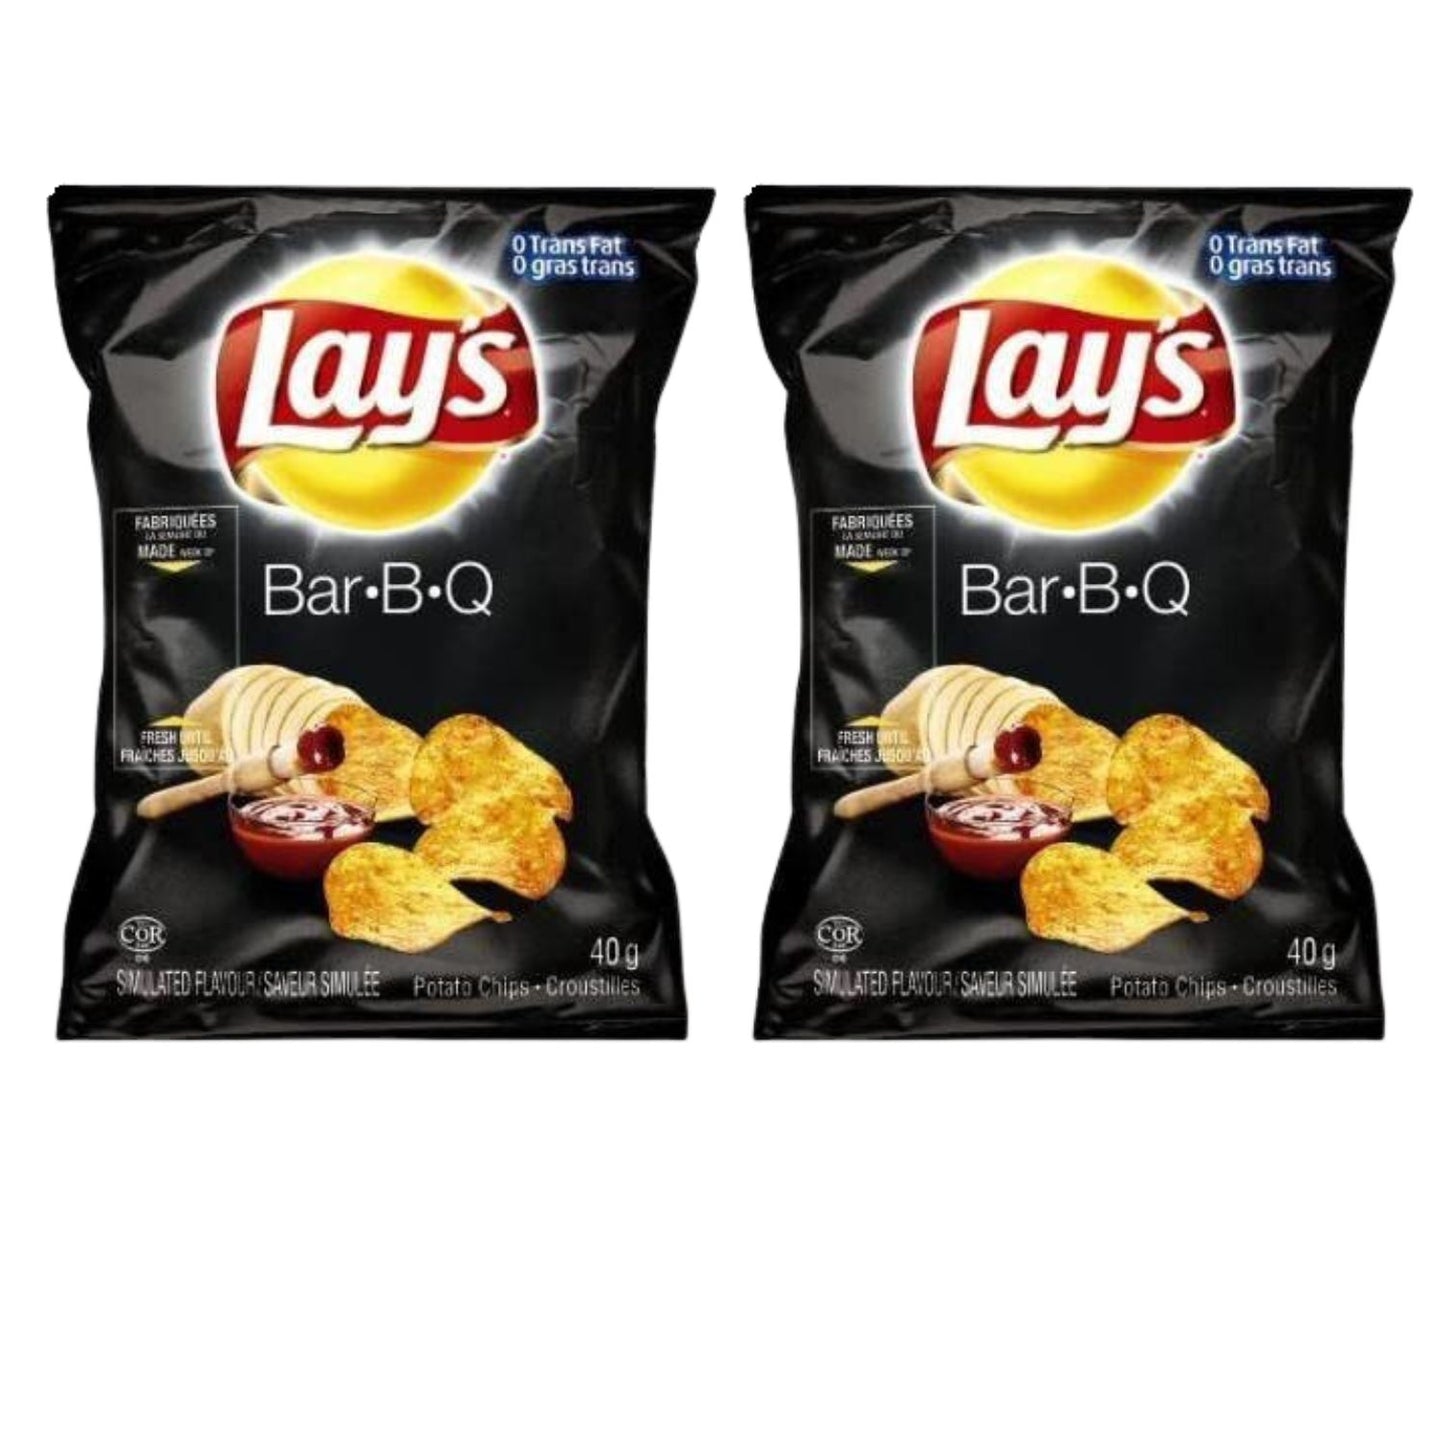 Lays Barbecue Potato Chips Snack Bag pack of 2